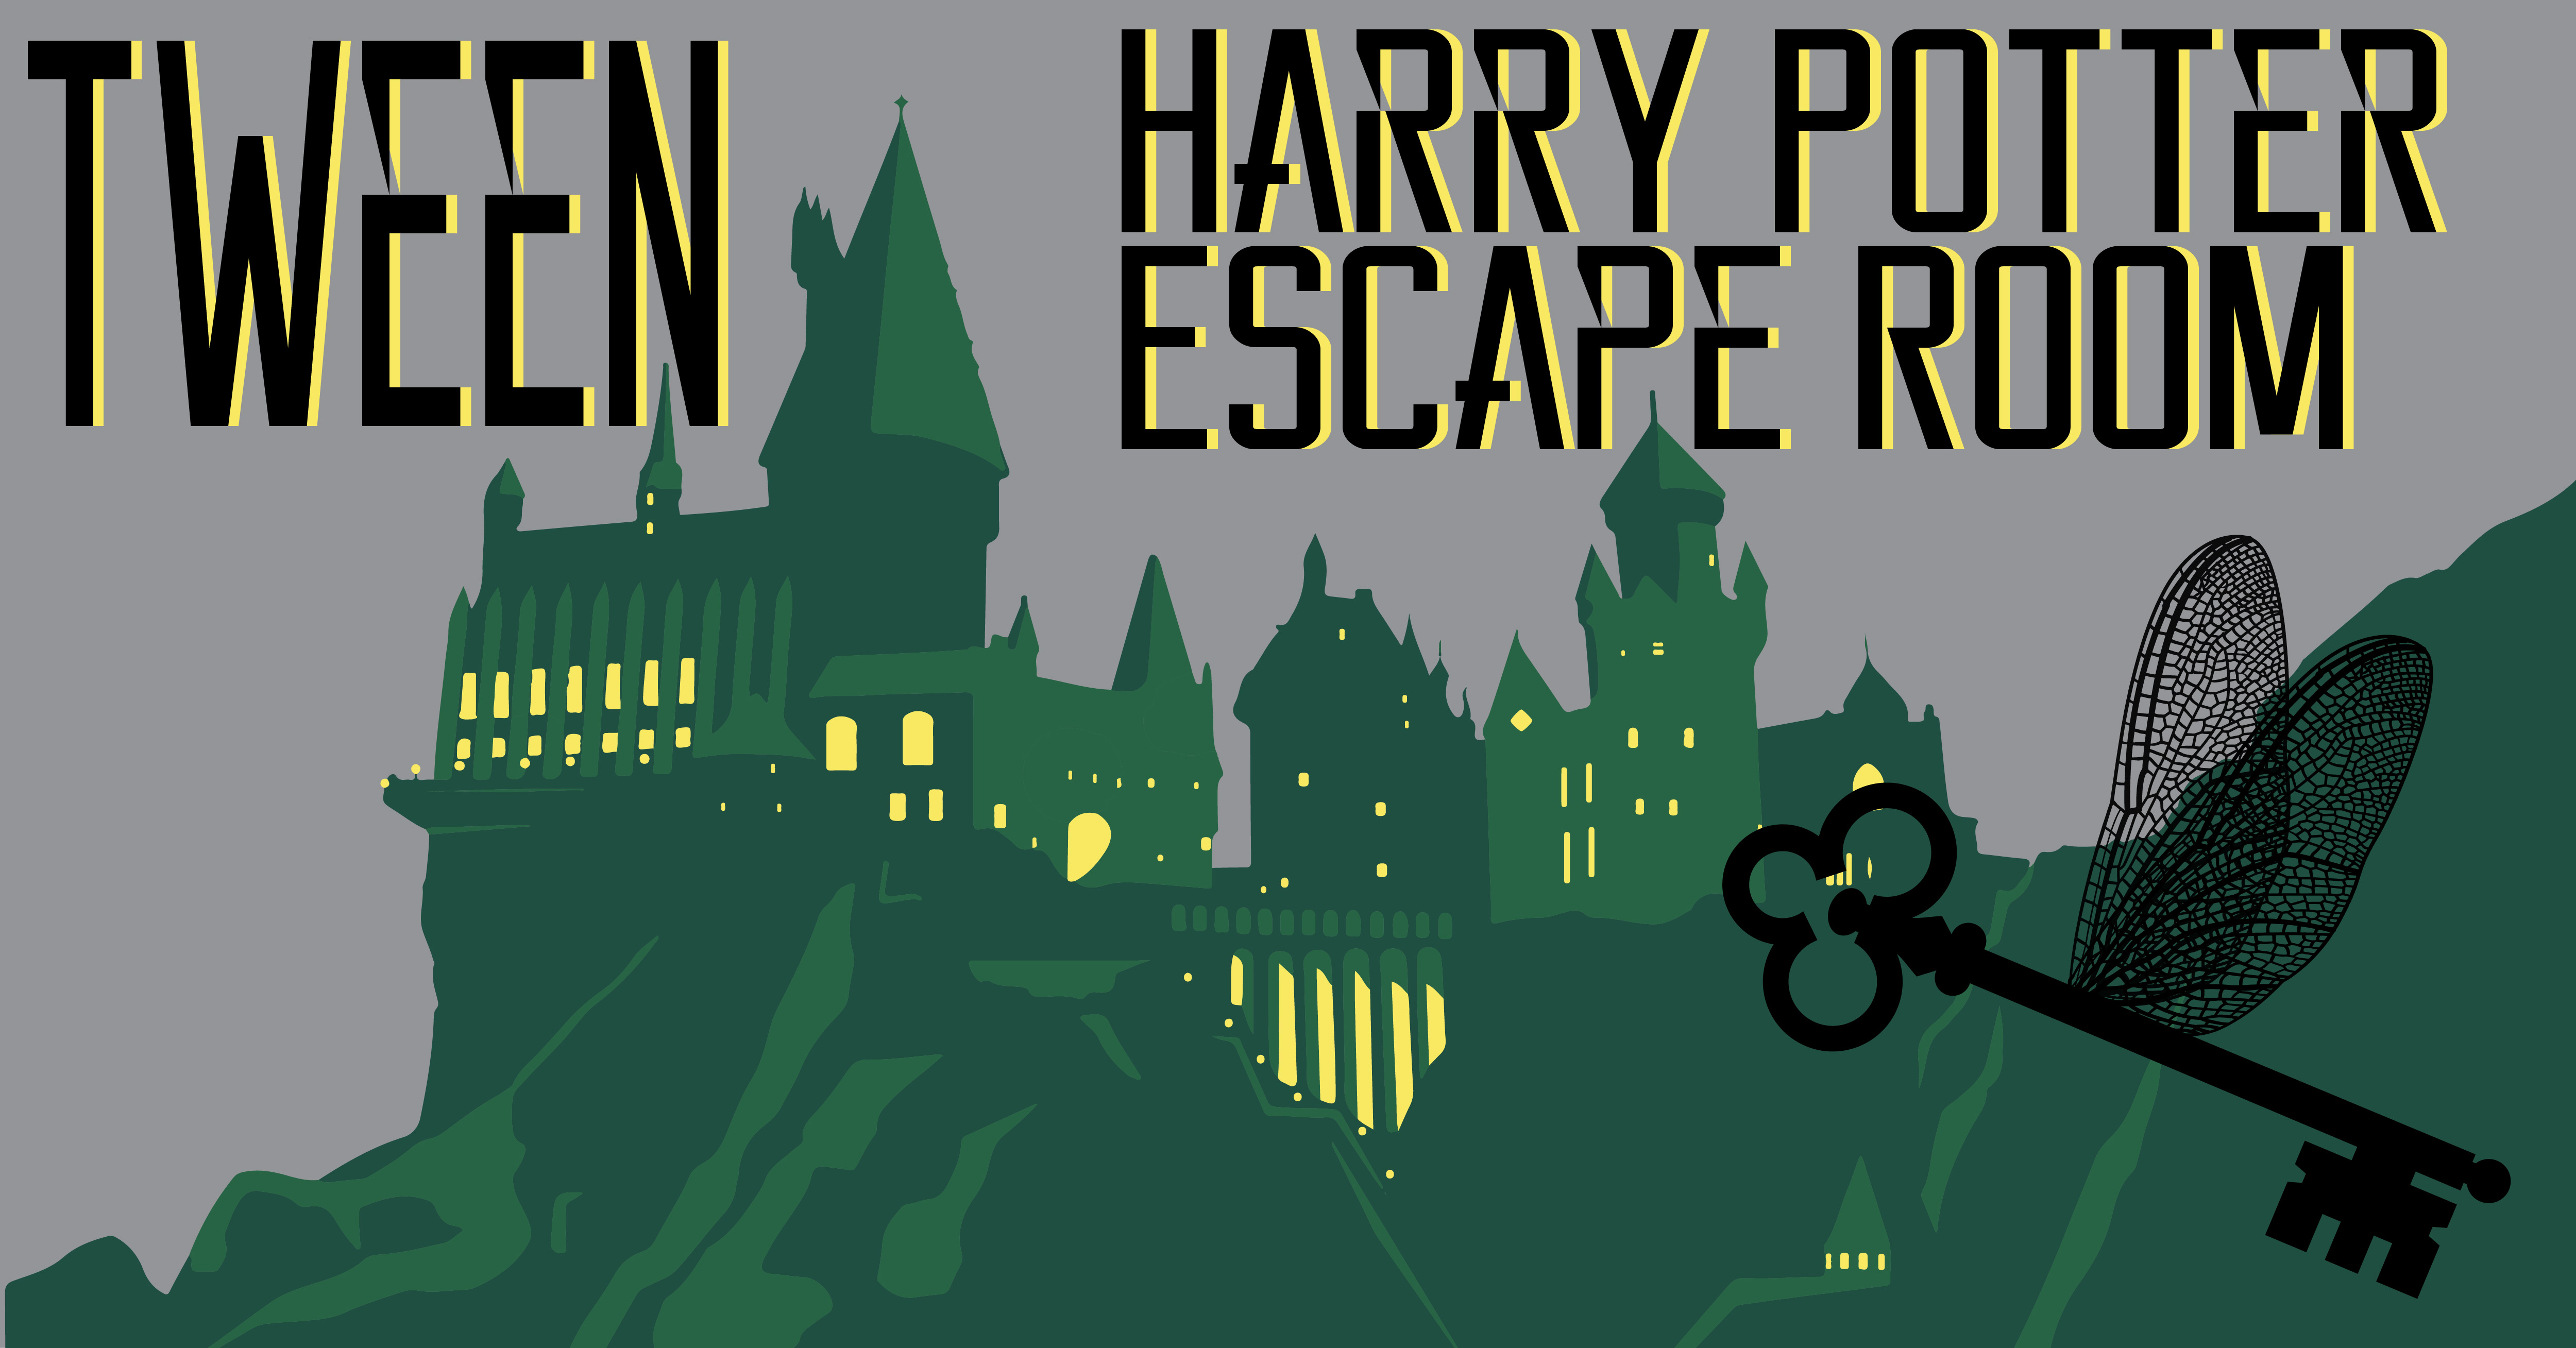 Illustration of Hogwarts and flying key, with text that says "Tween Harry Potter Escape Room"